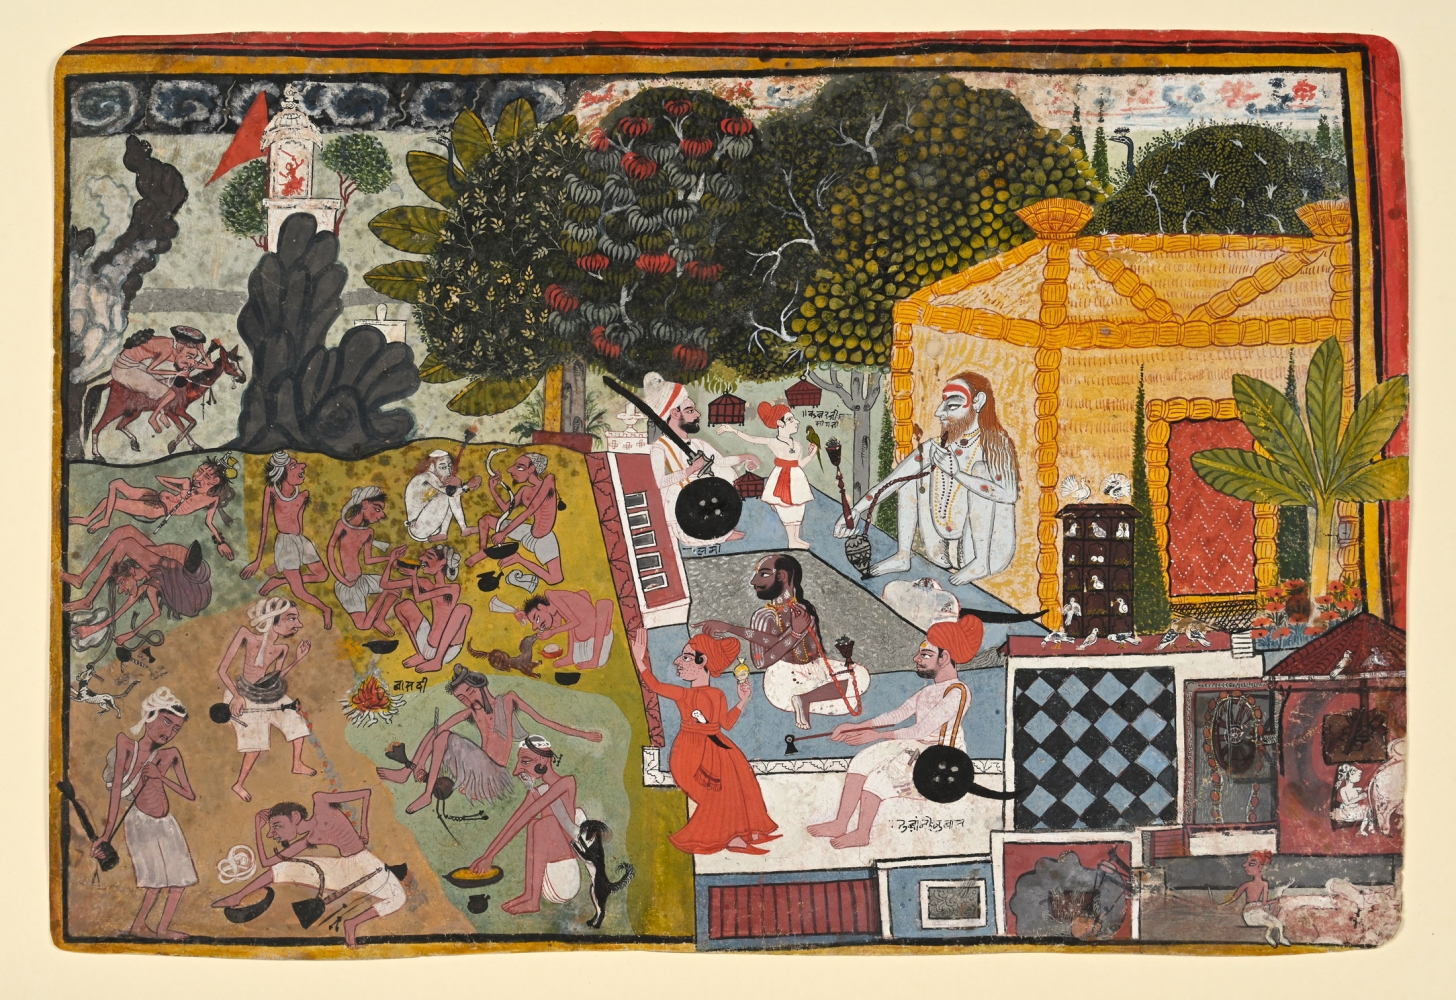 A prince, an ascetic and drug-addled sadhus, c. 1790